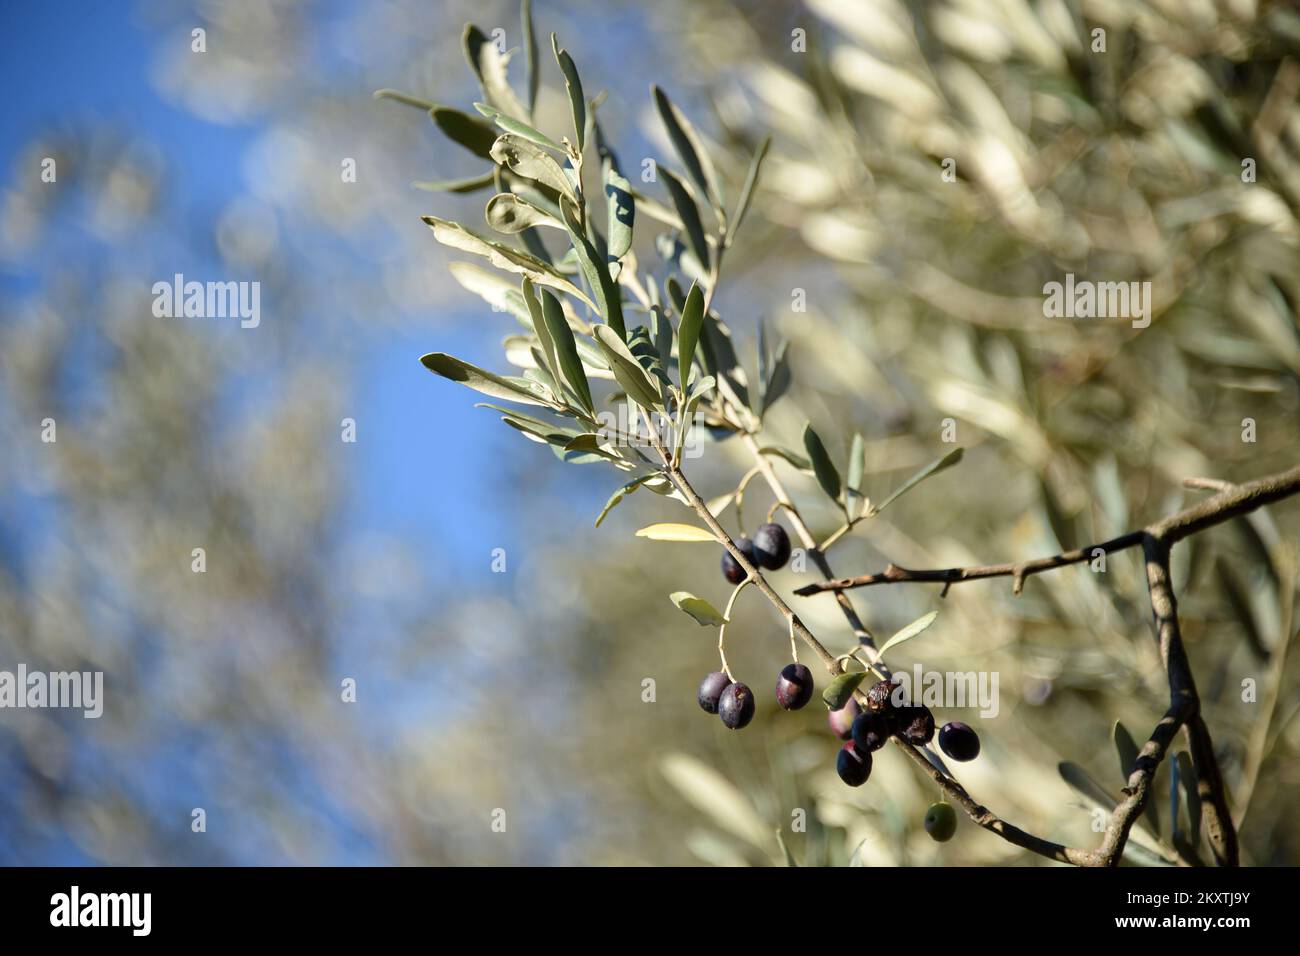 The picture shows the beautiful branches of an olive tree. The Brijuni olive tree is one of the oldest olive trees in the Mediterranean and its age is estimated at 2000 years. It is unique in its genetics, and due to the favorable climate and the influence of the surrounding plants, it still bears fruit. For about 20 years, oil has been produced, harvested from this olive, and which is then given as a gift to VIP guests and business partners of NP Brijuni. It can produce up to 30 liters of unique oil per year., in Brijuni, Croatia, on October 16, 2021. Photo: Srecko Niketic/PIXSELL Stock Photo